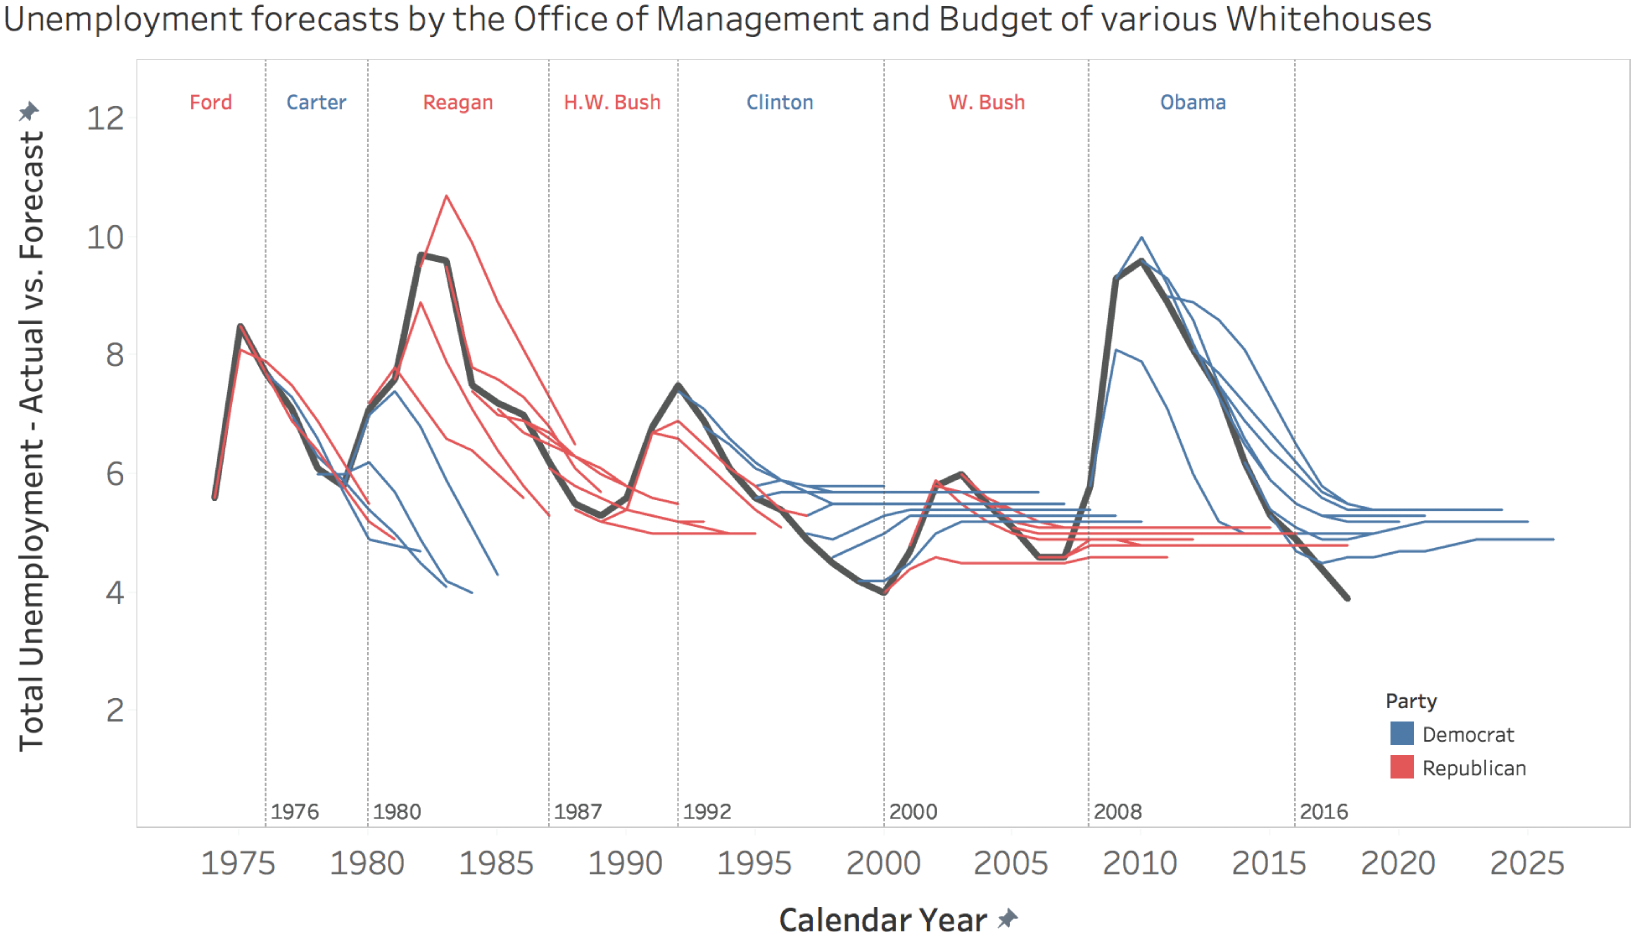 Graph depicting unemployment forecasts by the Office of Management and Budget of various White House administrations.